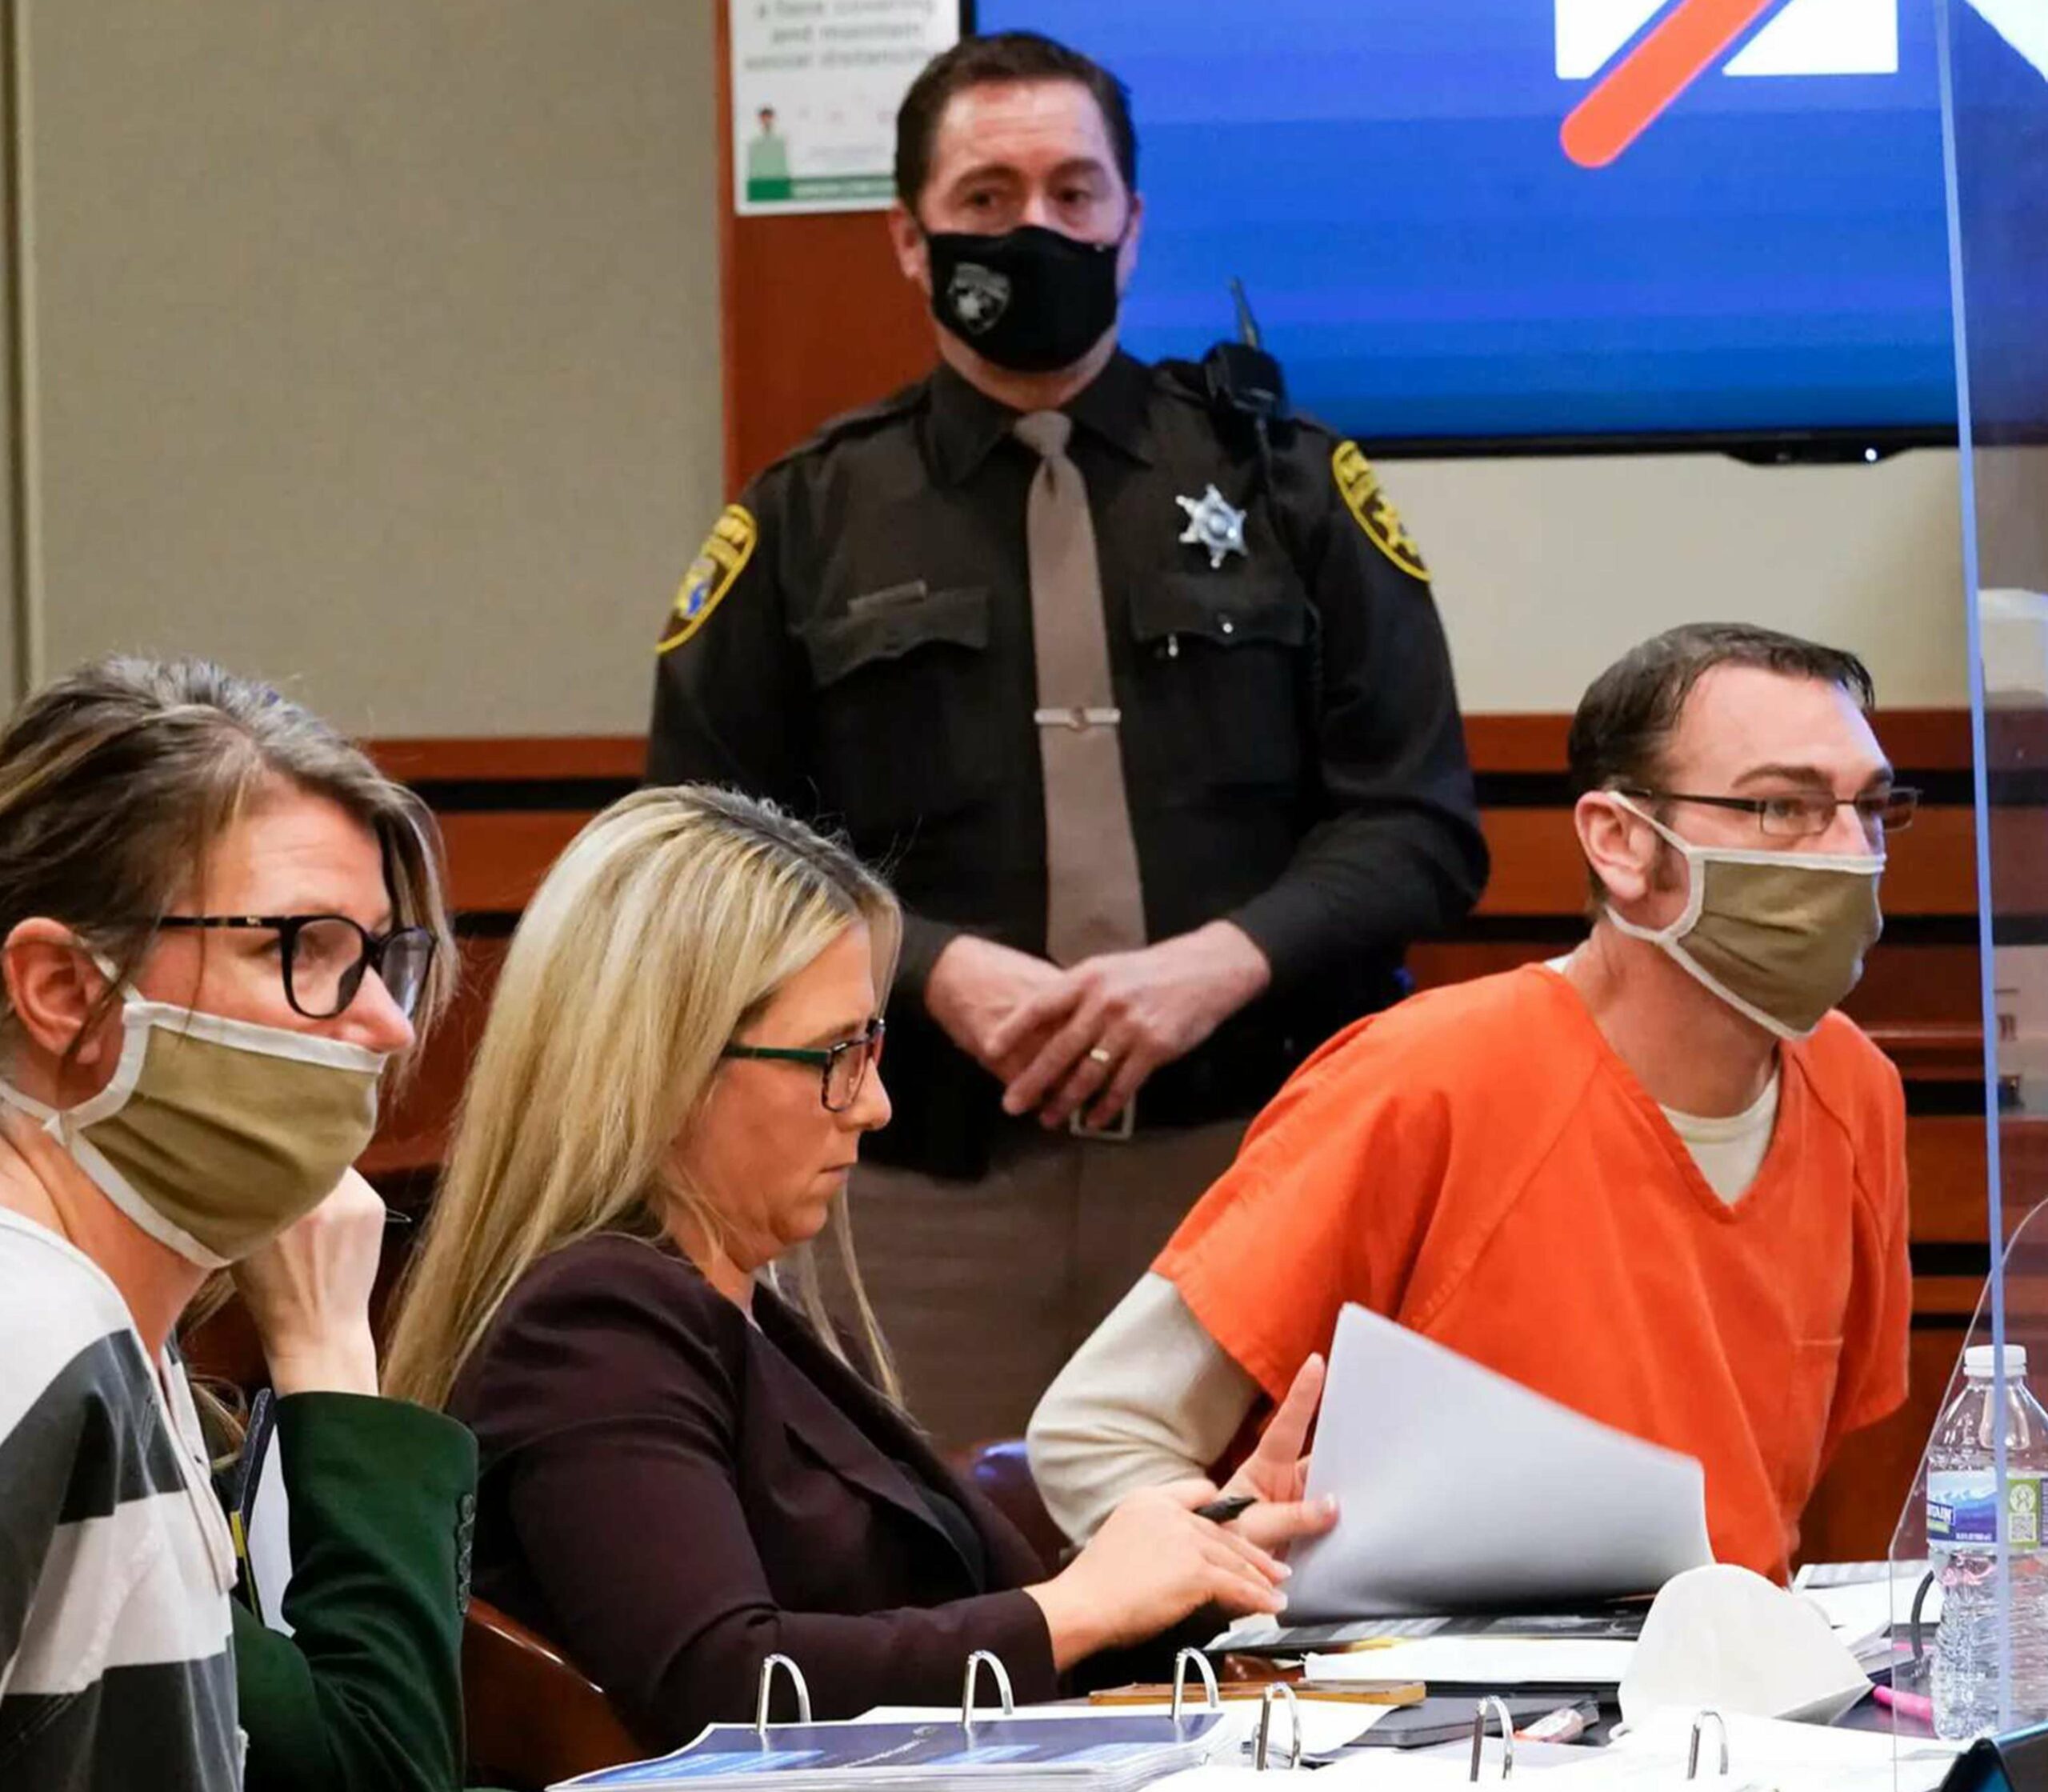 Michigan school shooter's father convicted of manslaughter 3